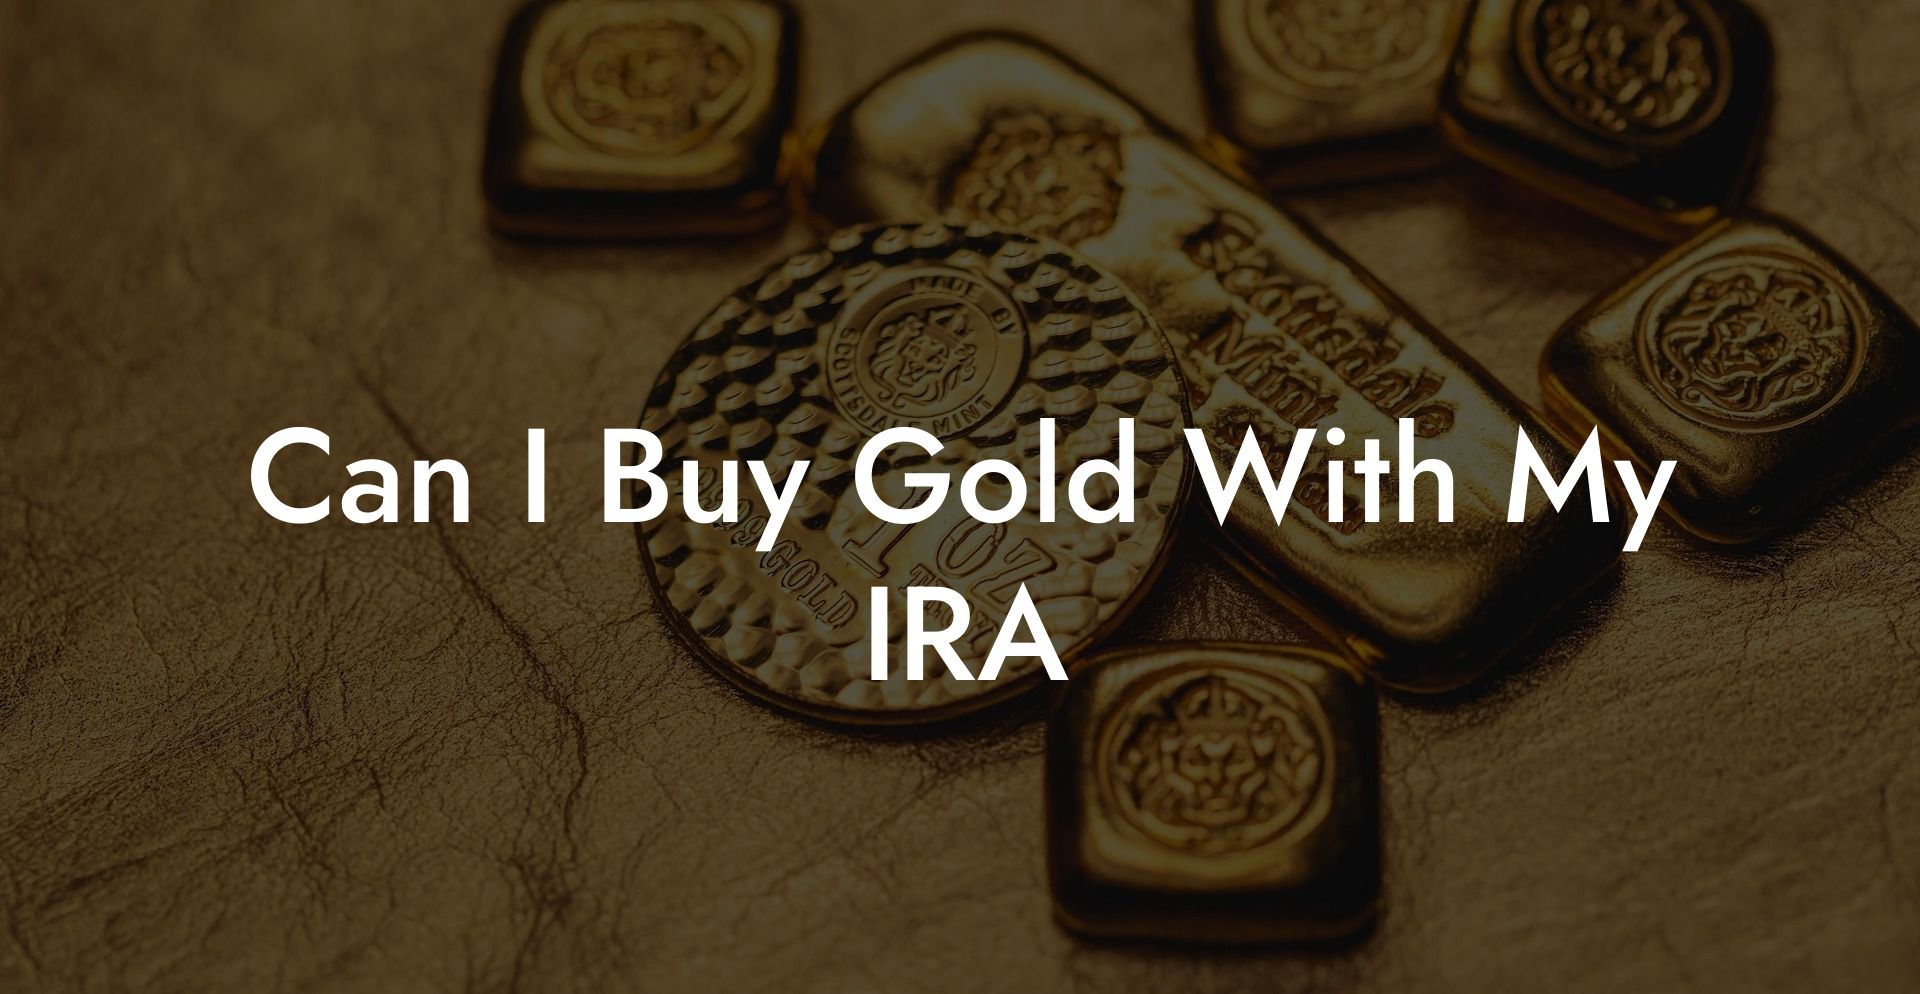 Can I Buy Gold With My IRA